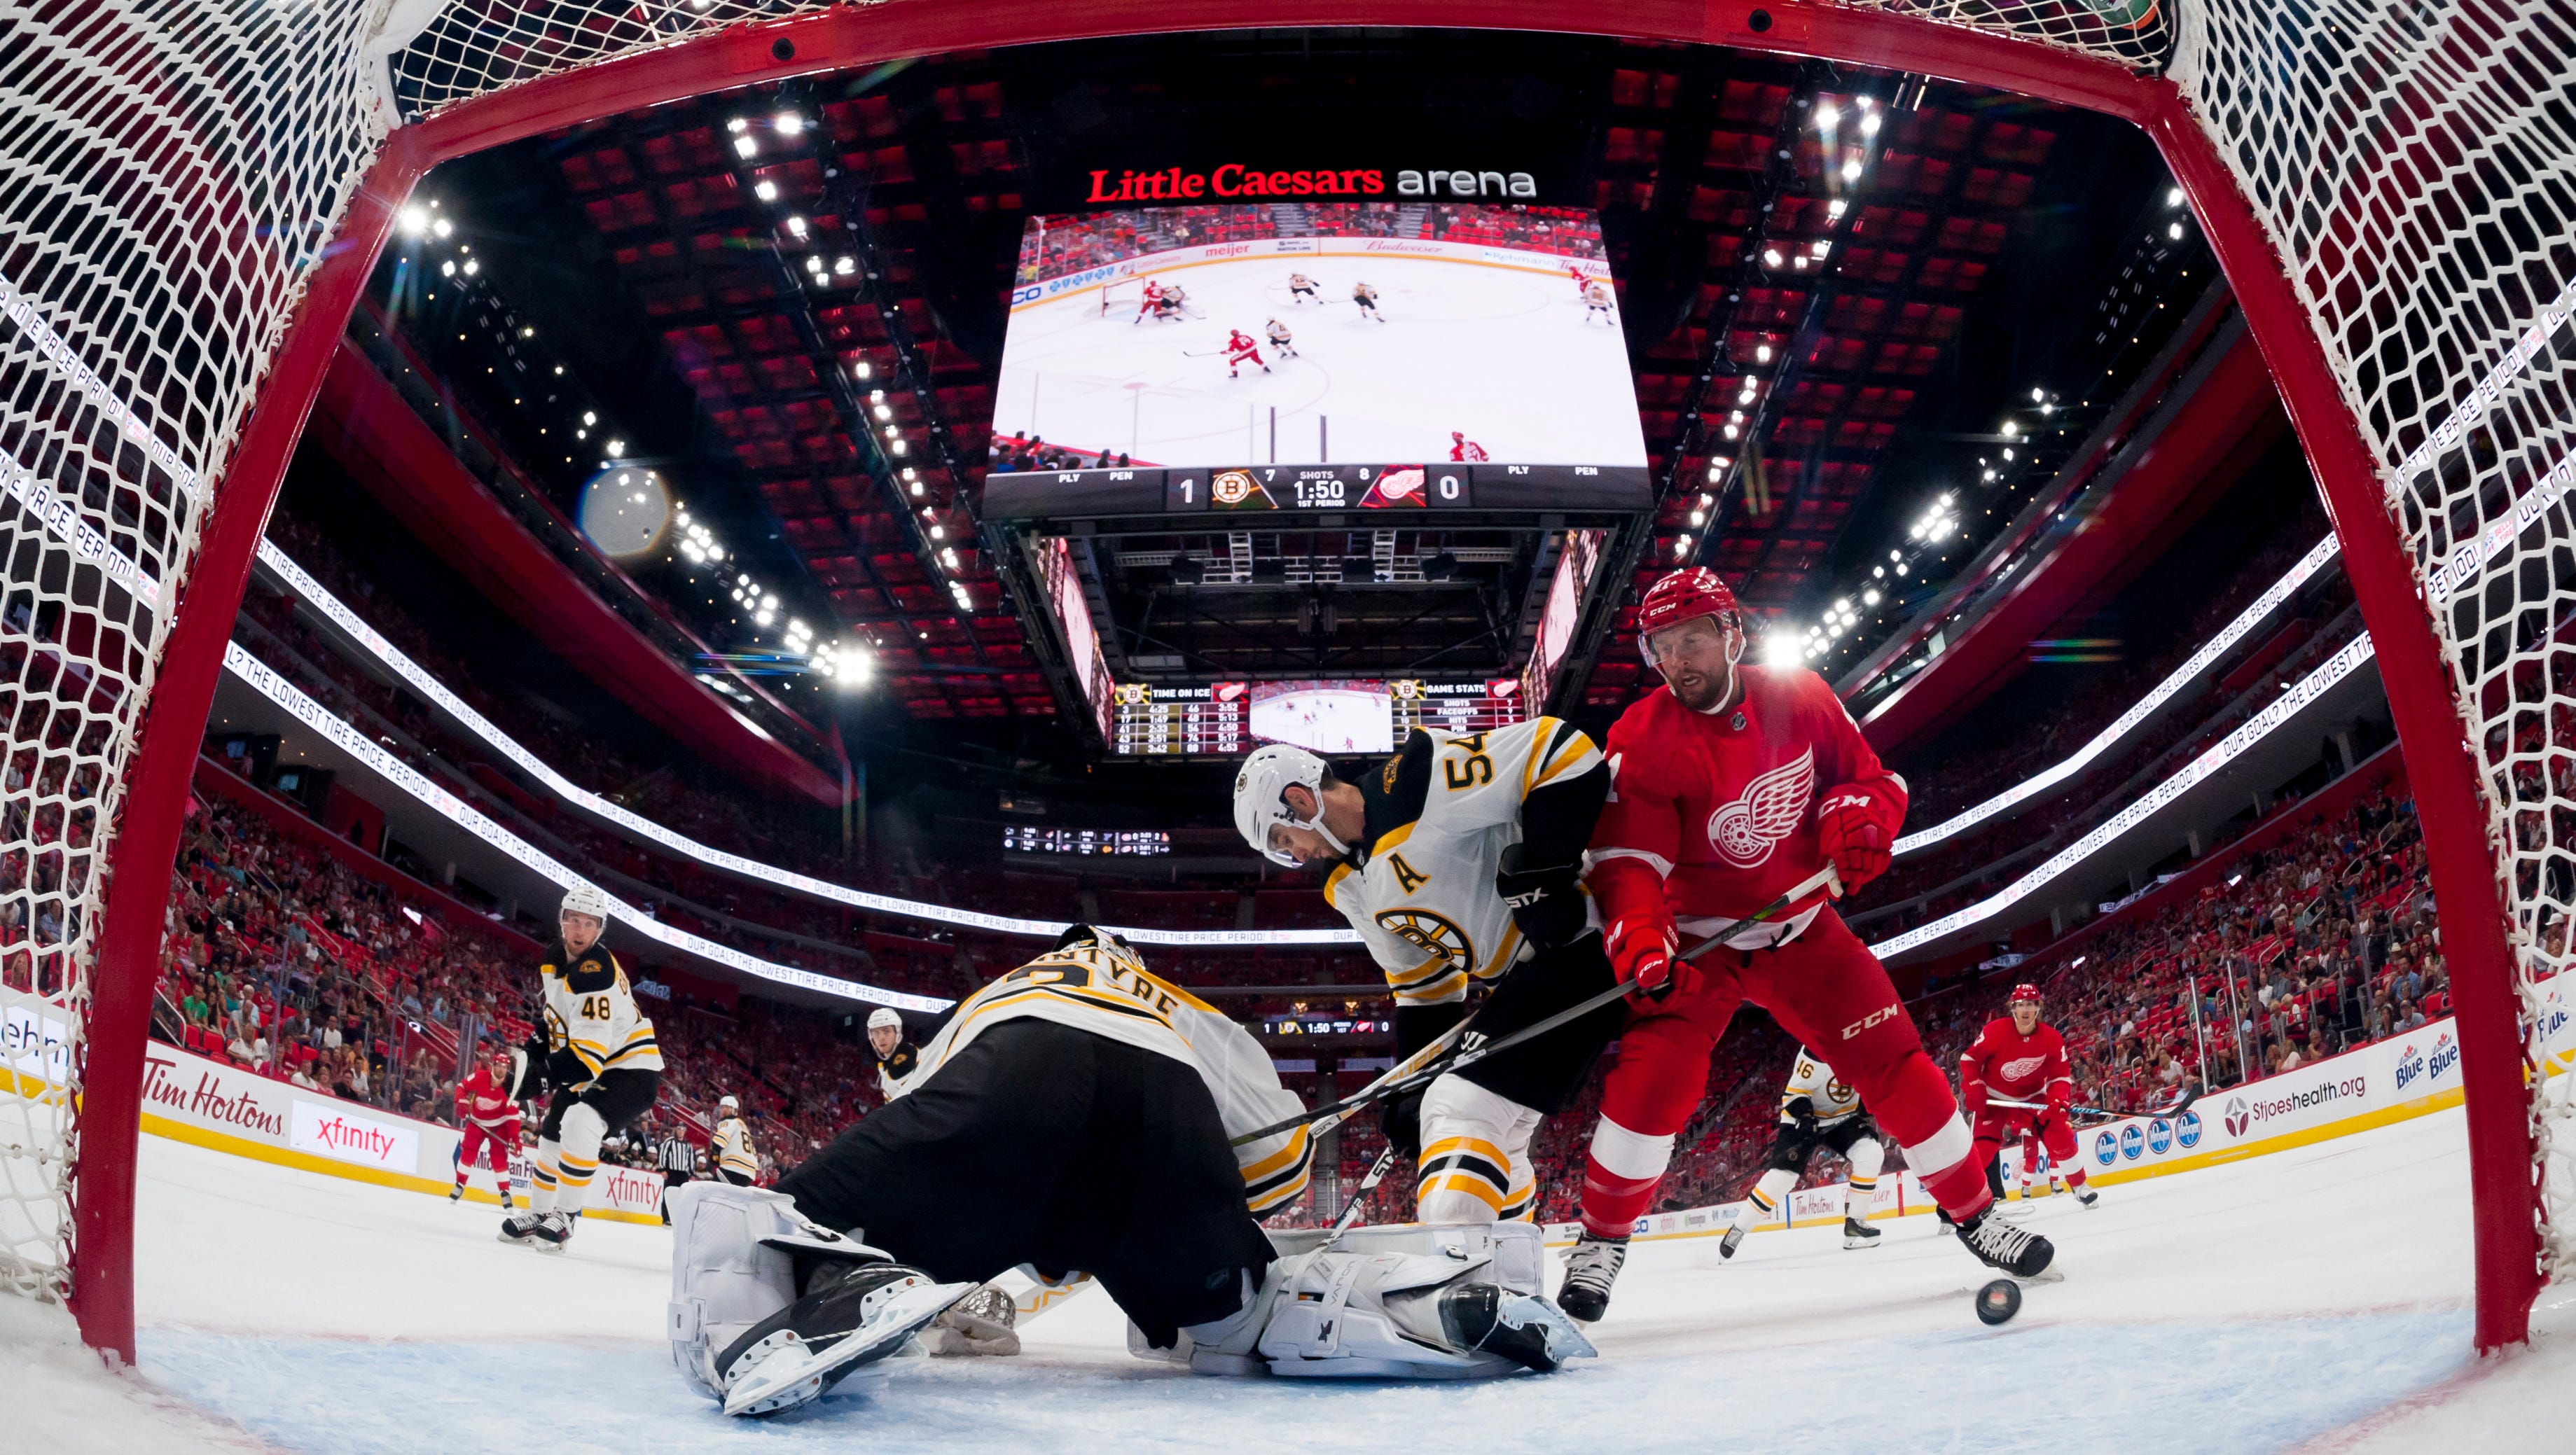 Detroit right wing Luke Glendening tries to get the puck past Boston goalie Zane McIntyre and Adam McQuaid in the first period at Little Caesars Arena, in Detroit, September 23, 2017.